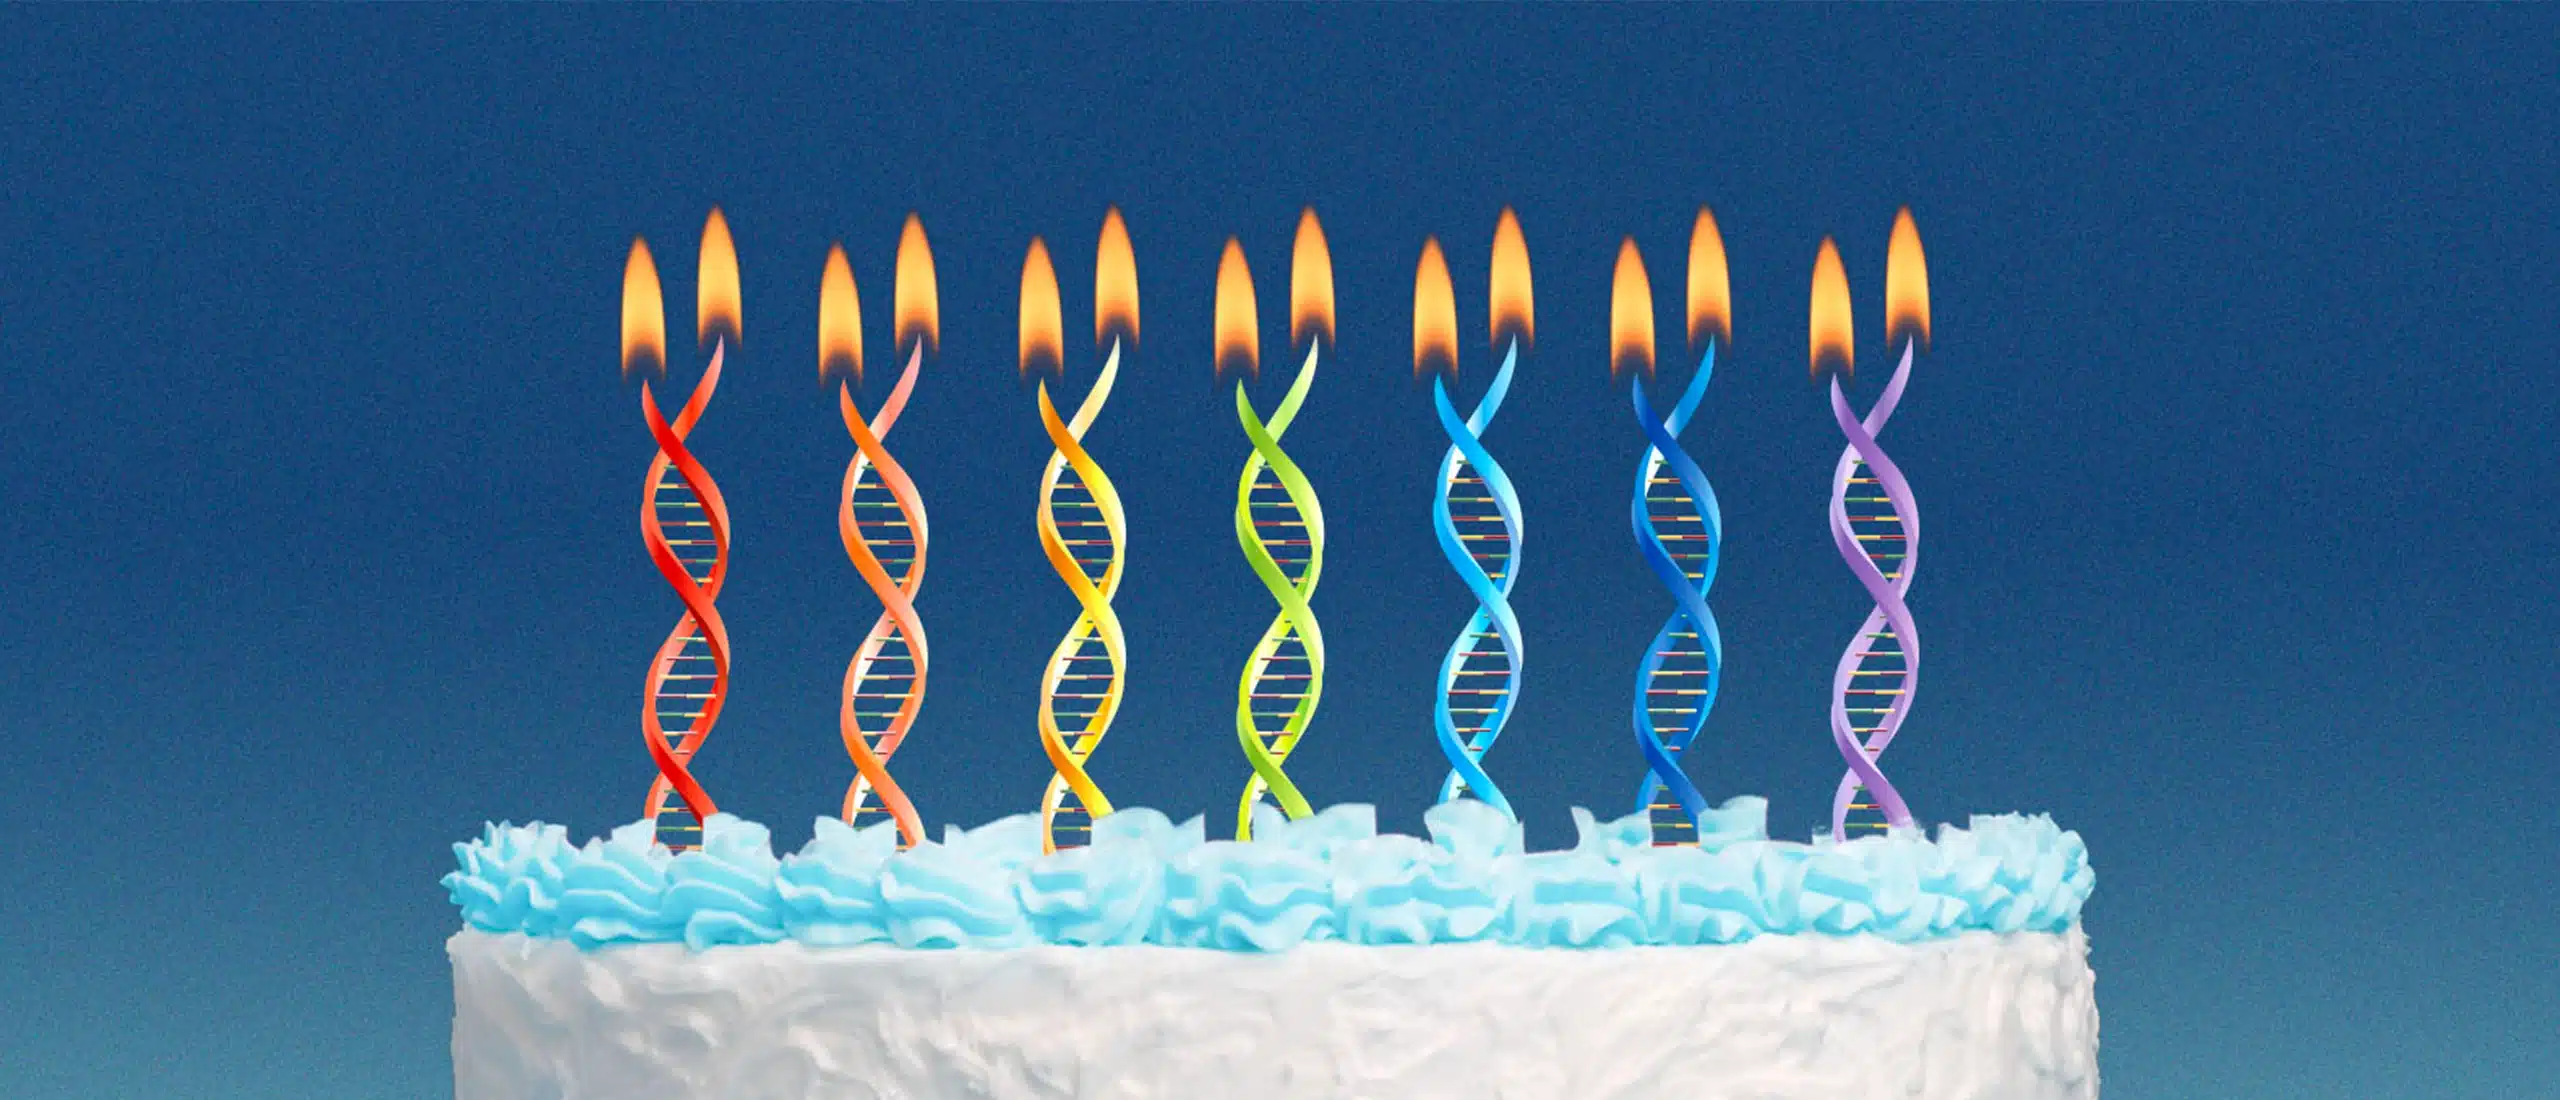 Birthday cake with dna candles on kitchen table